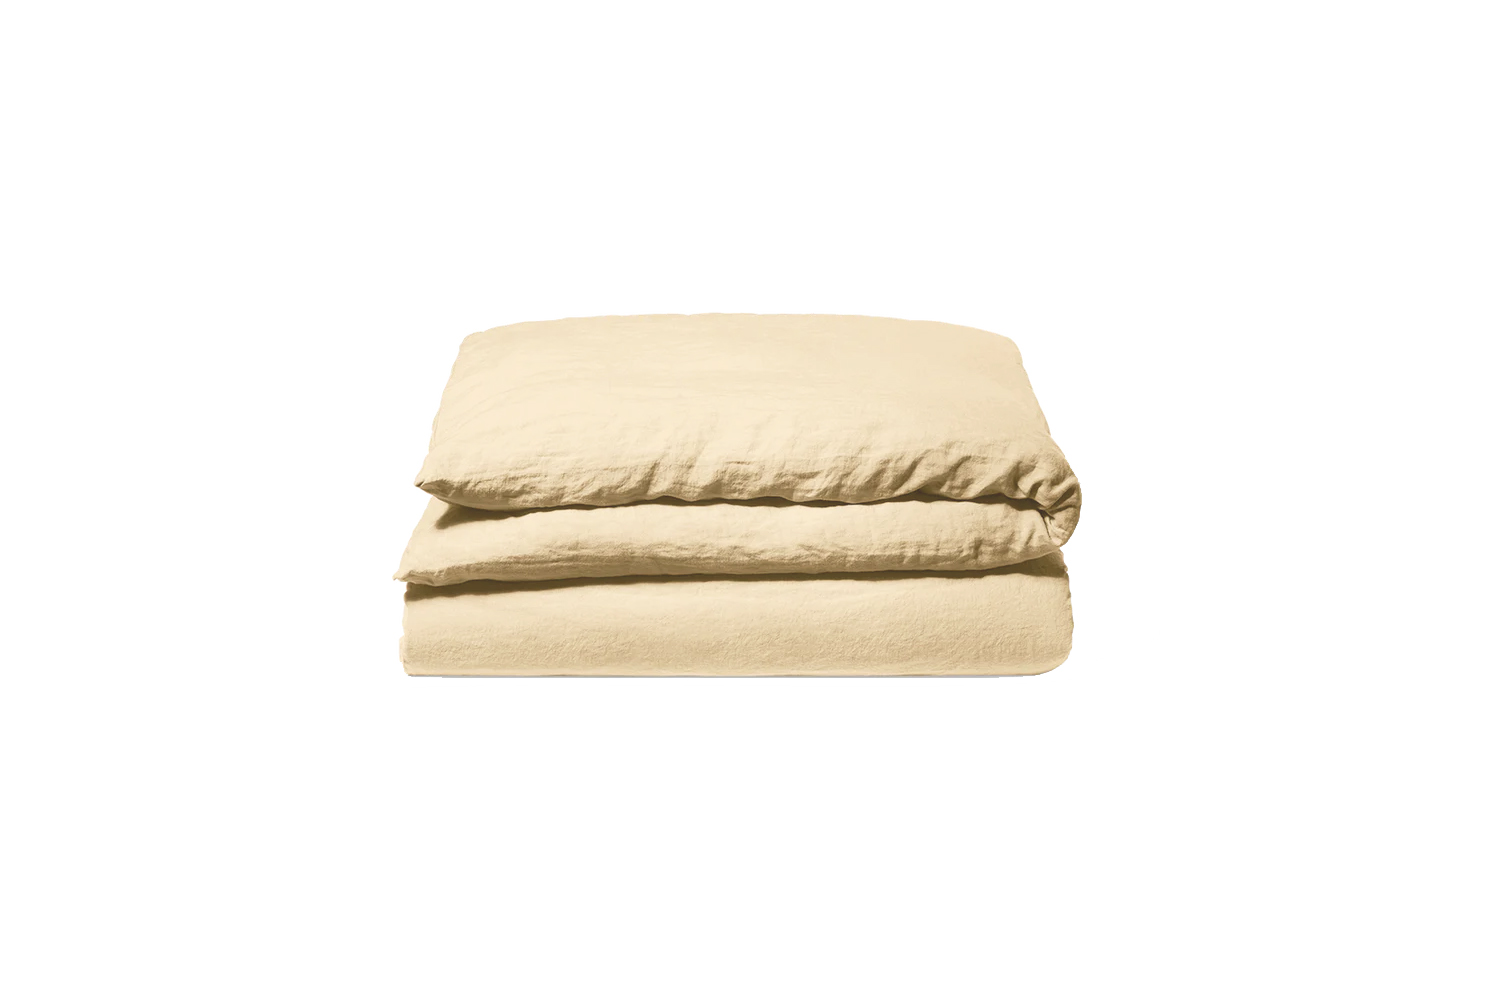 the merci washed linen duvet cover in light yellow kaolin is €\175 for t 18